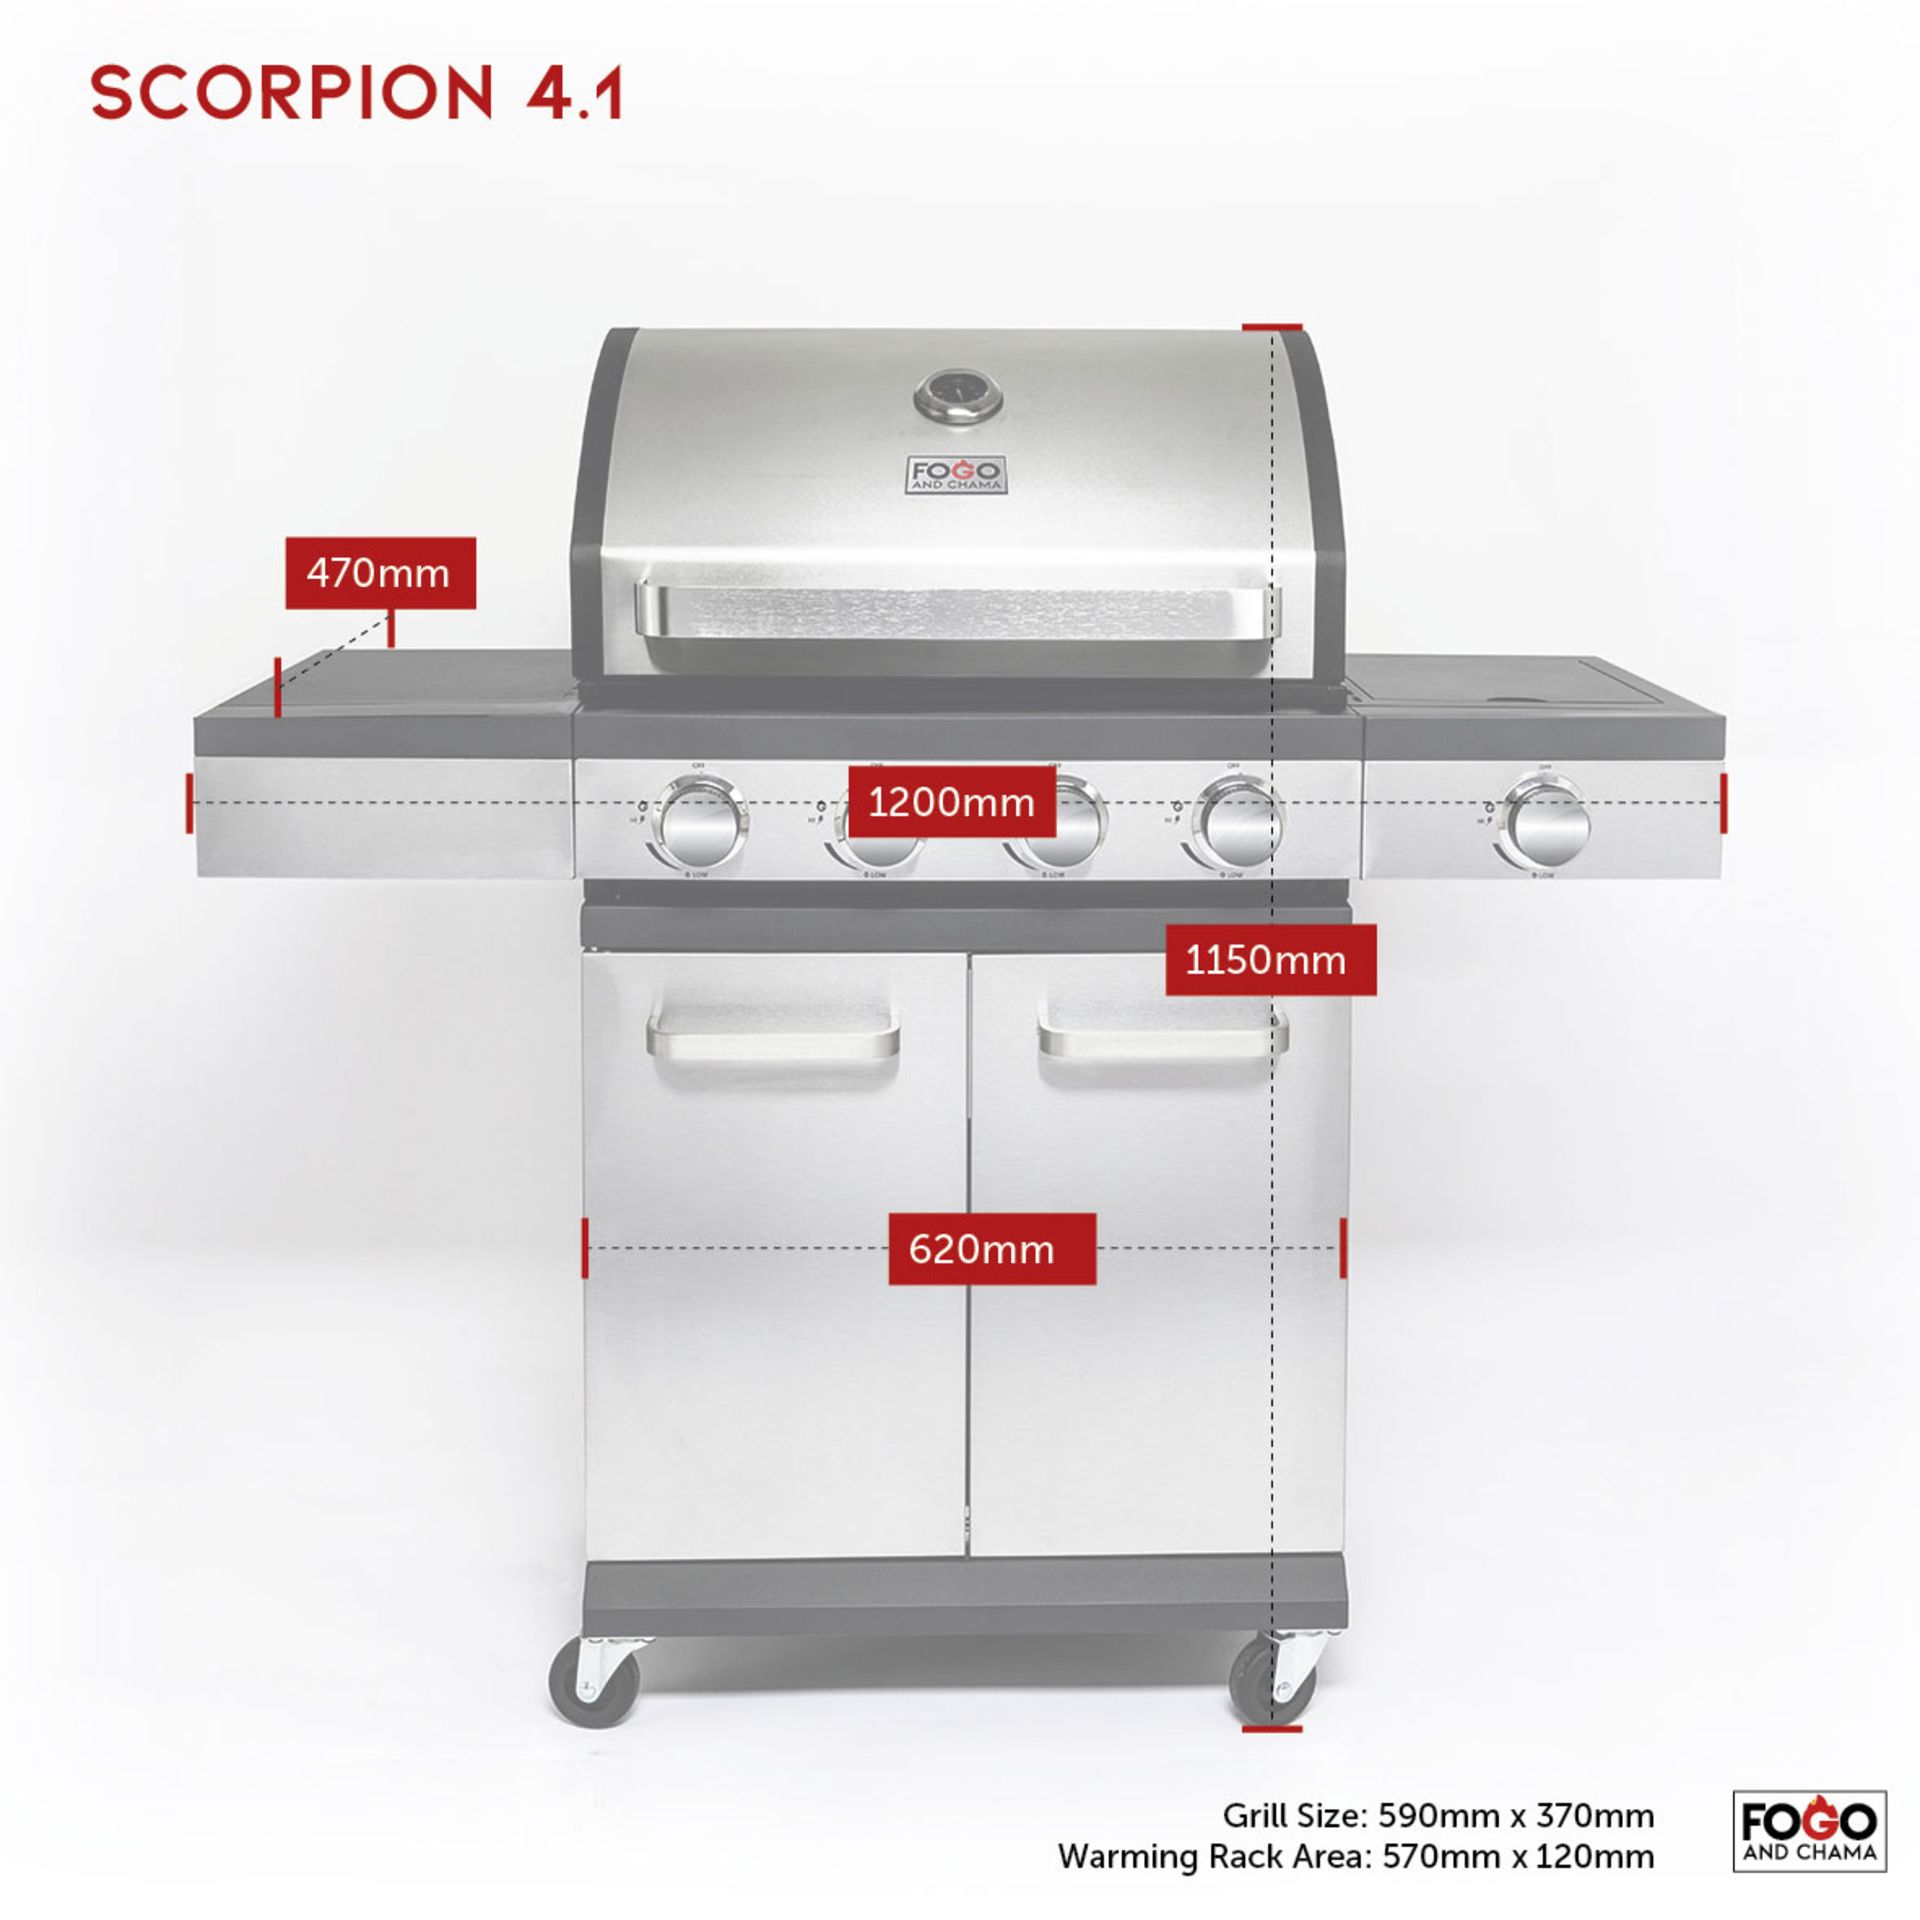 RRP Â£499 - New Fogo & Charma 4 Burner BBQ In Stainless. The Scorpion 4.1 in stainless steel in a - Image 9 of 9